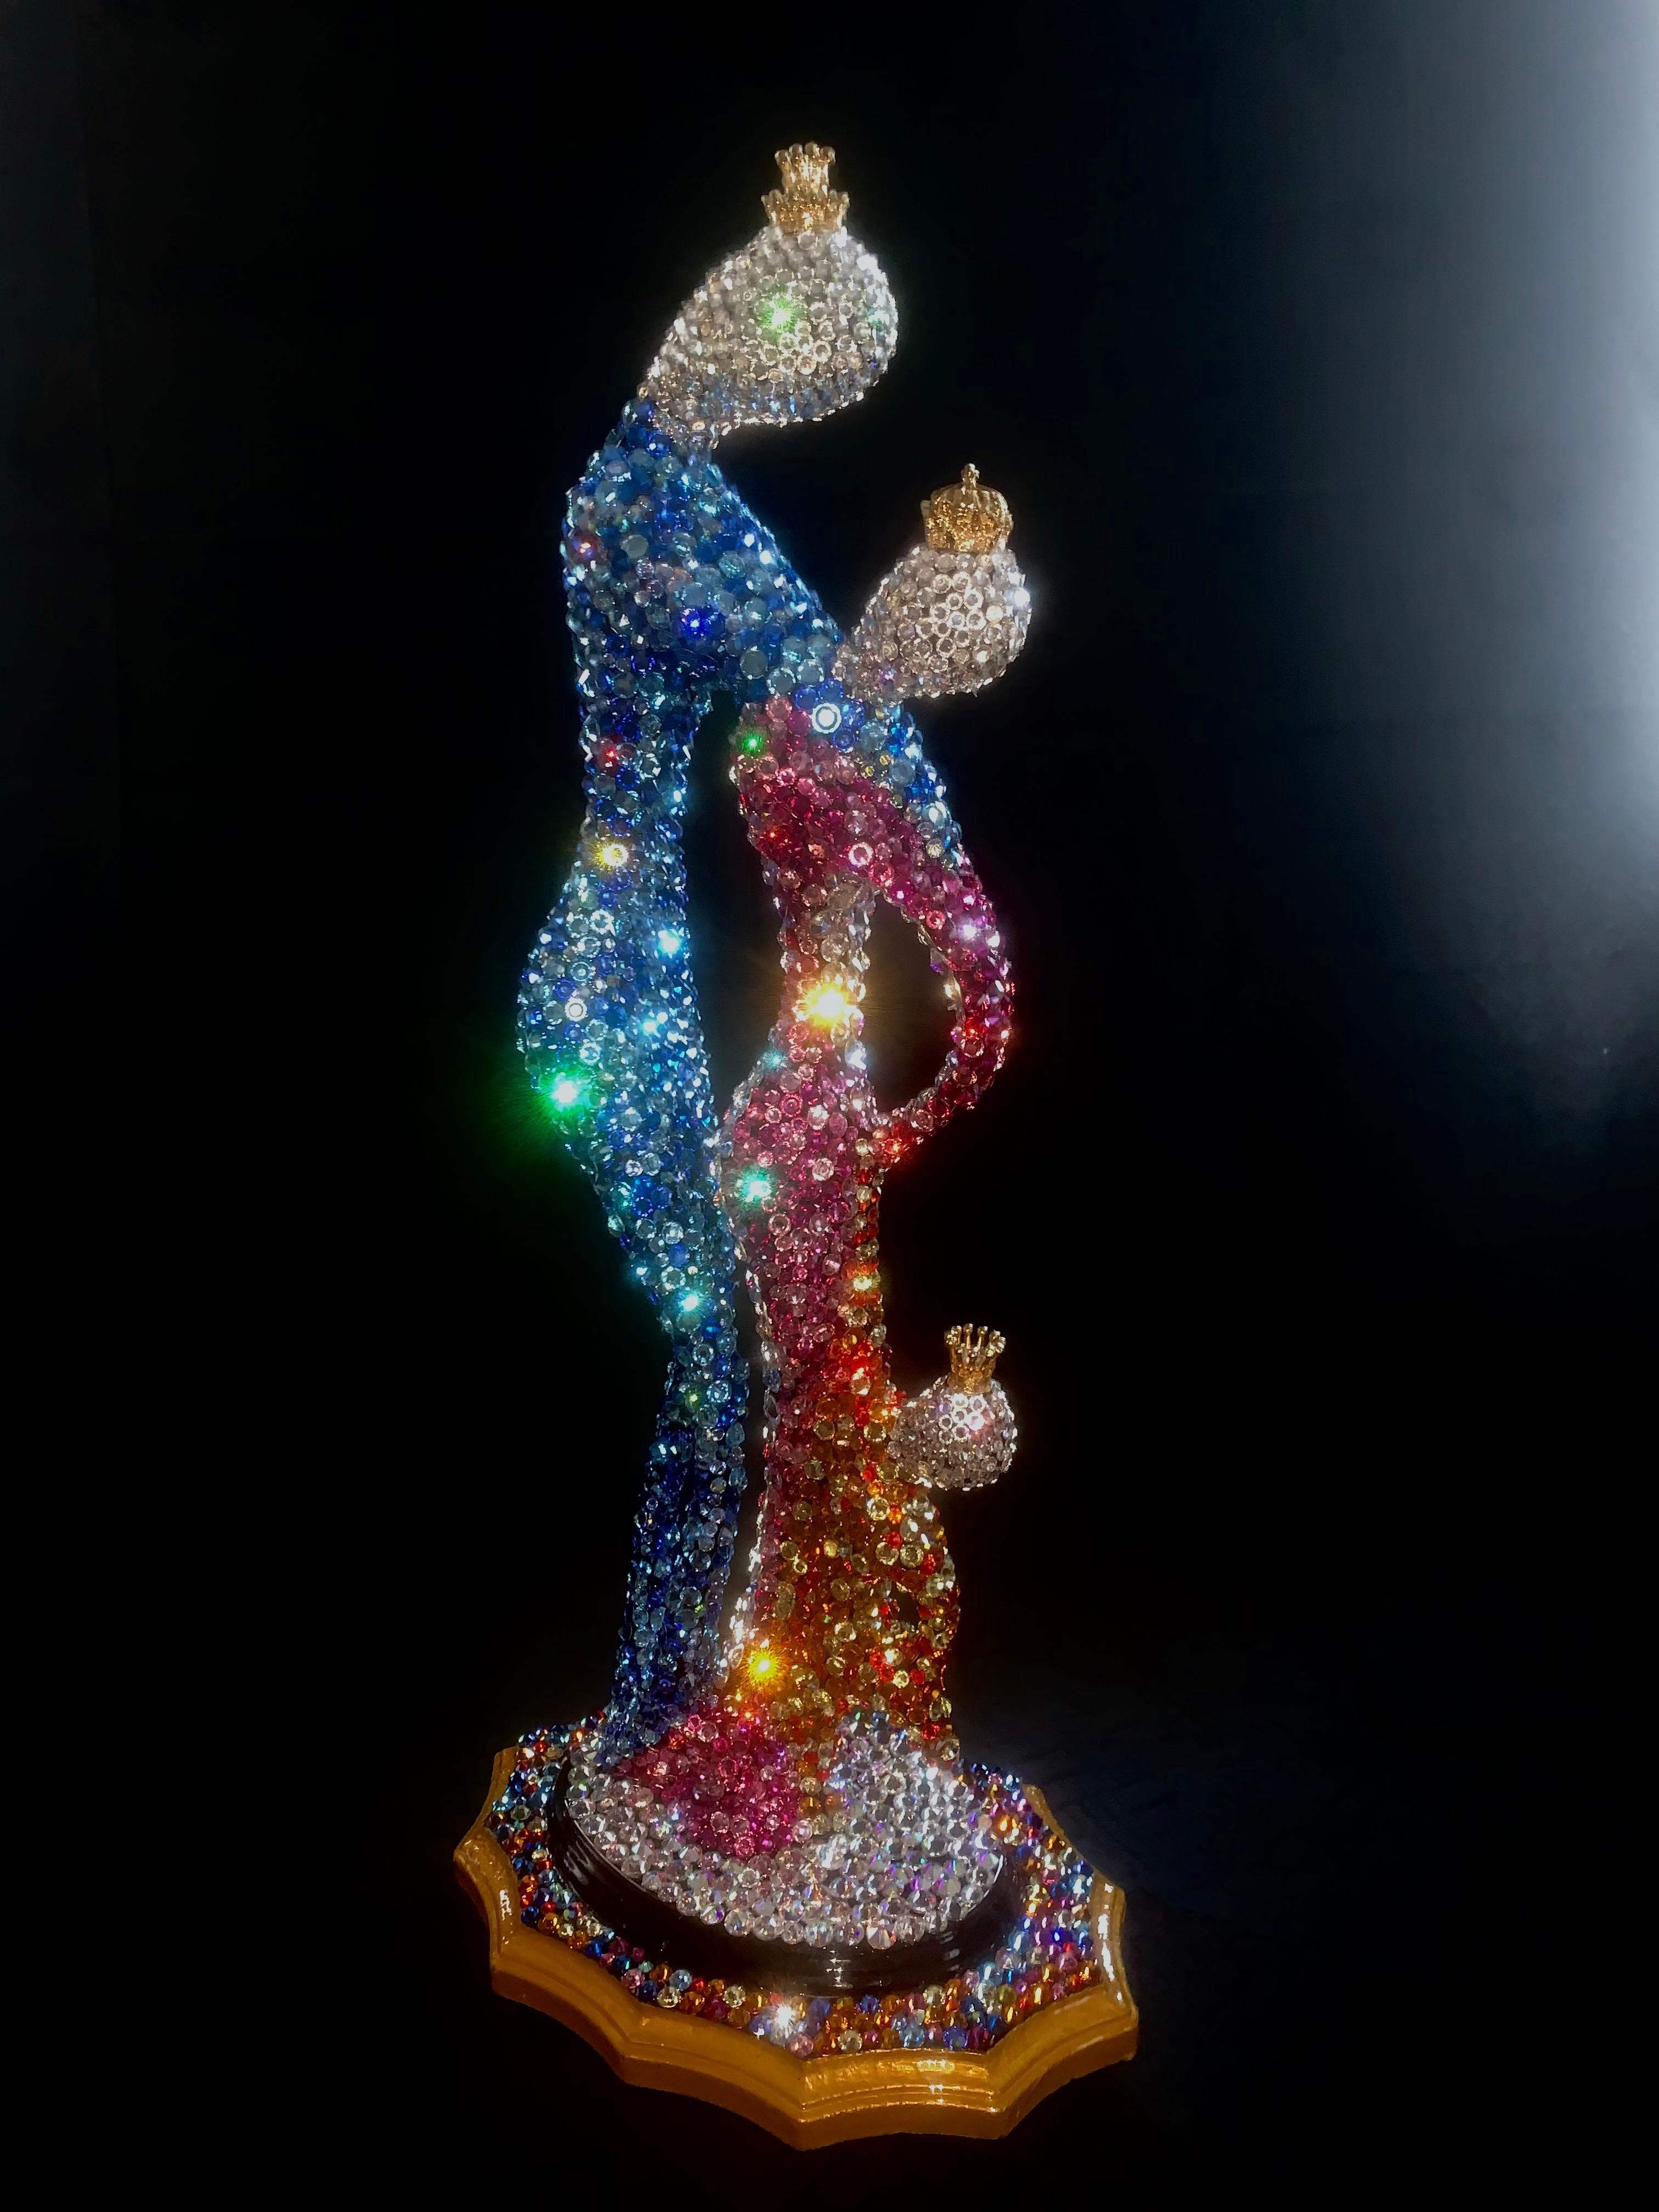 THE ROYAL FAMILY (1 Of a Kind Sculpture W/ Genuine Swarovski Crystals) - Art by Mauro Oliveira